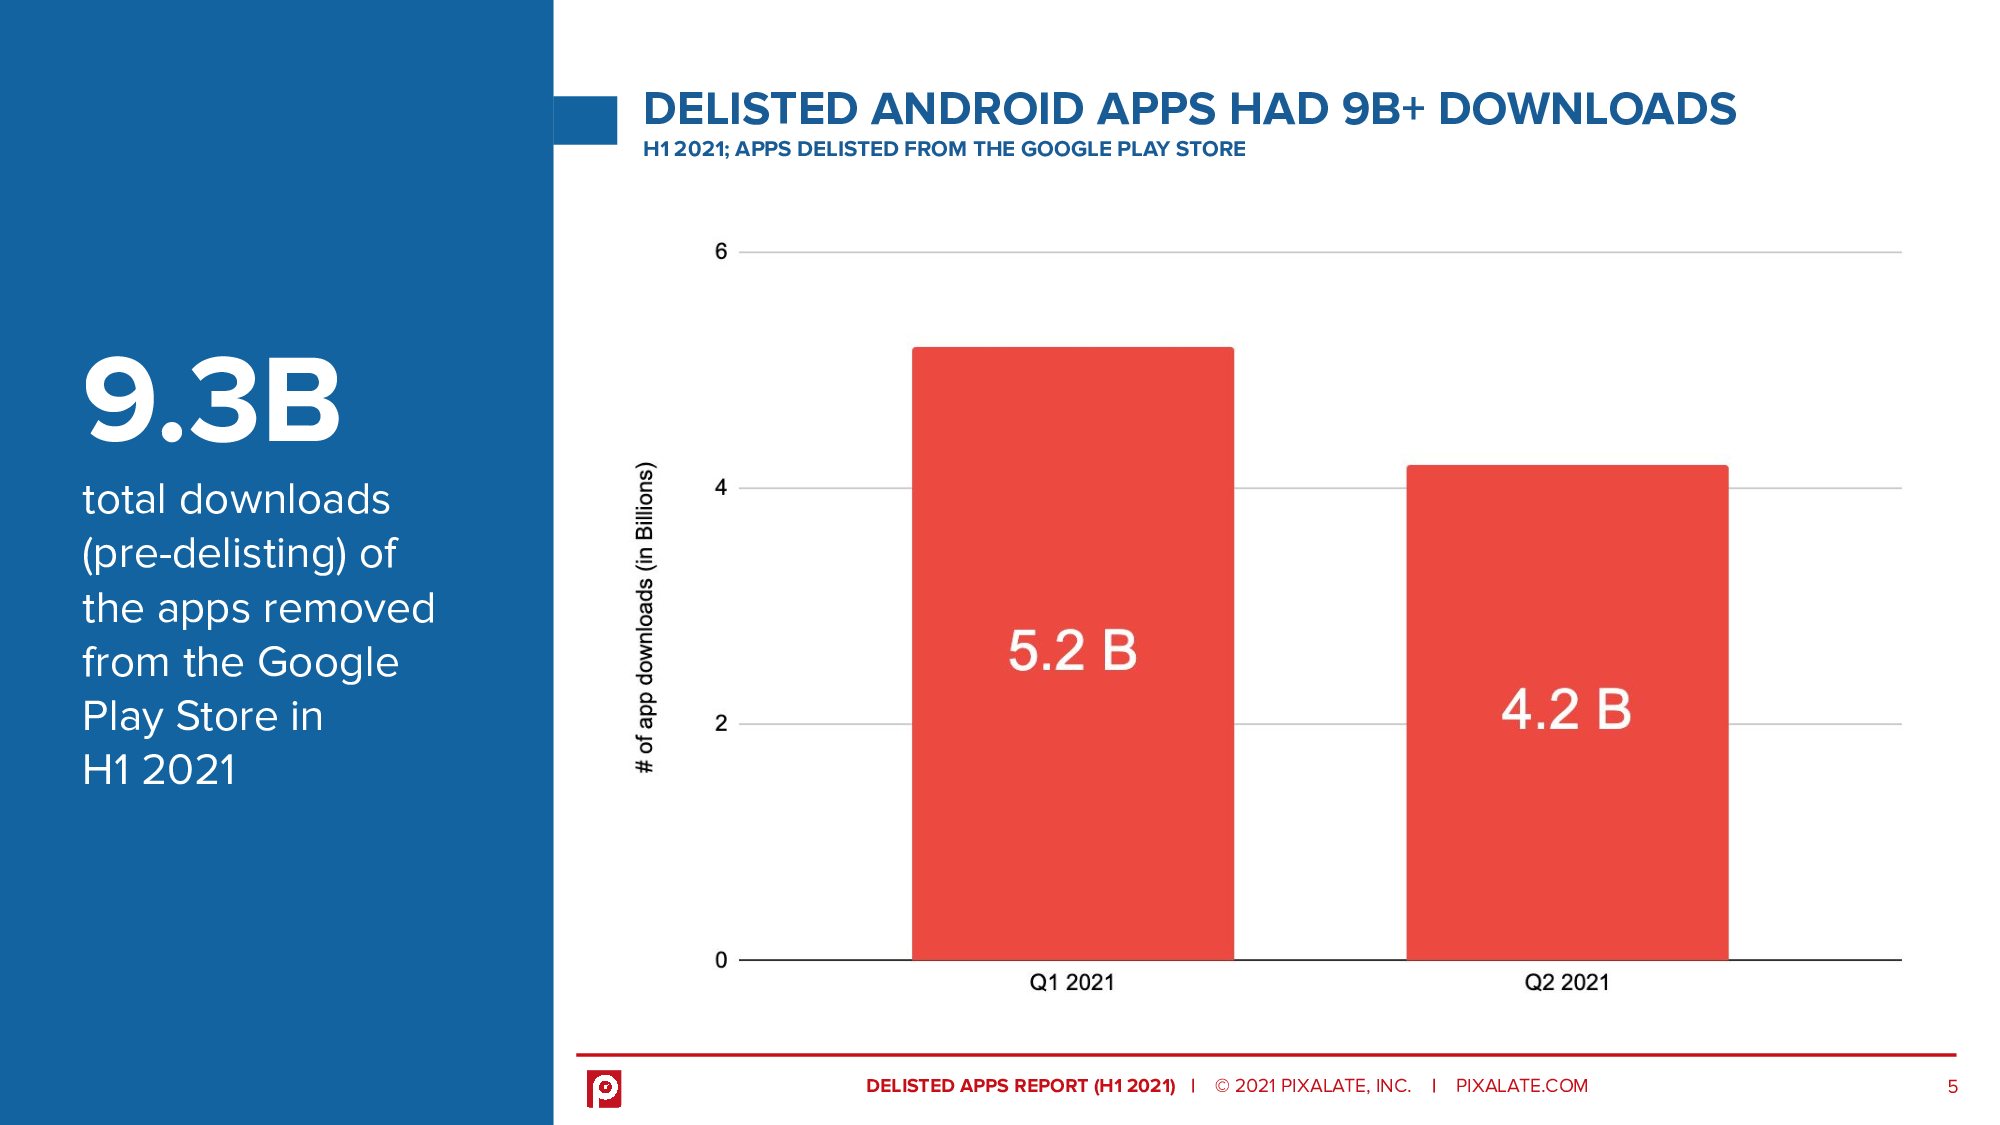 Android delisted apps were downloaded 9.3 billion times prior to delisting